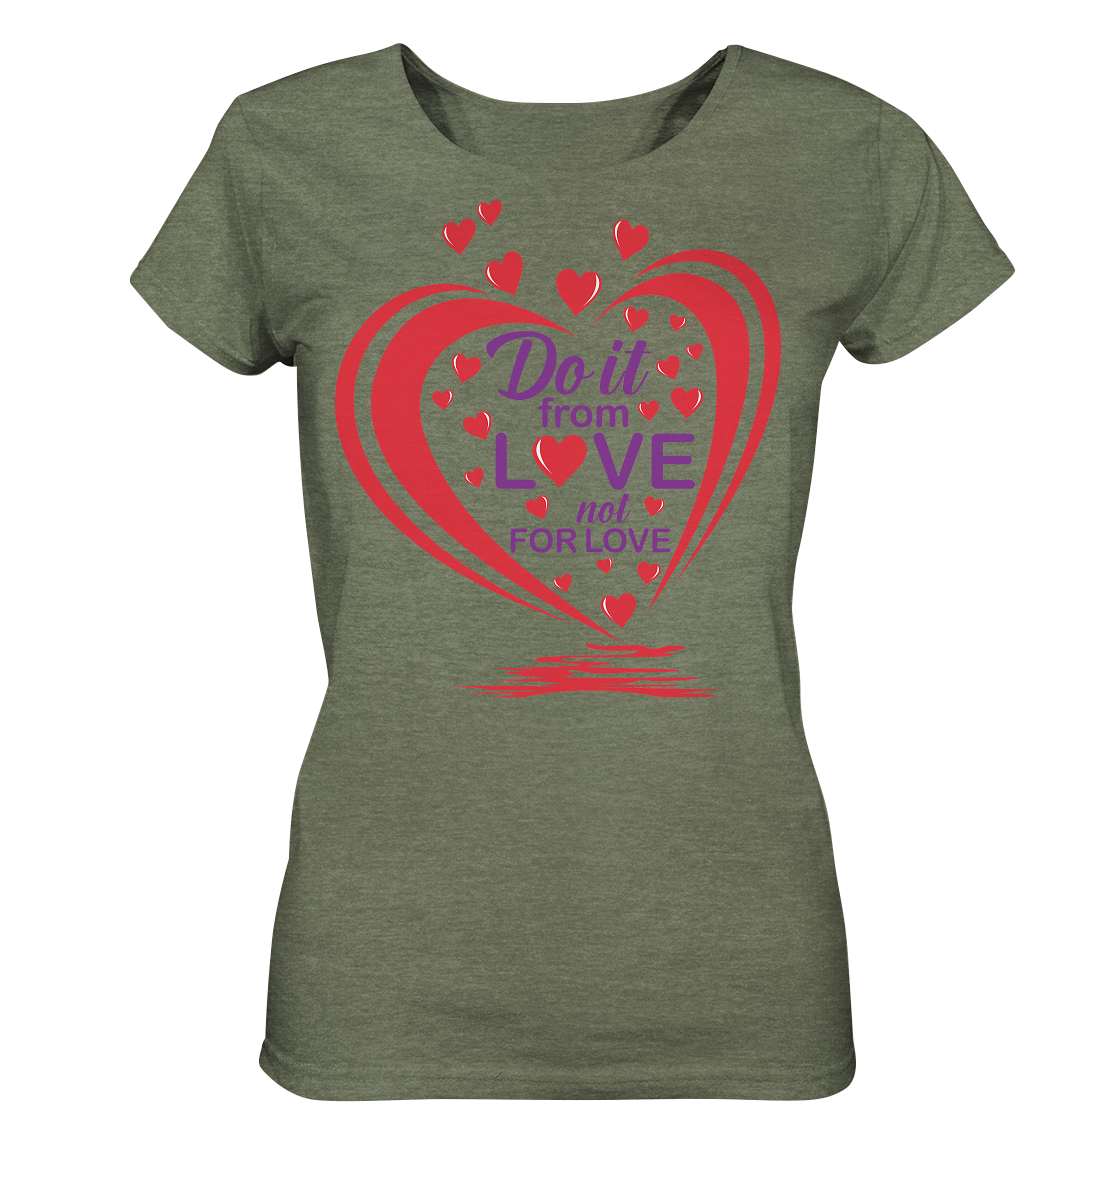 Do it from love not for love - Ladies Organic Shirt (meliert)